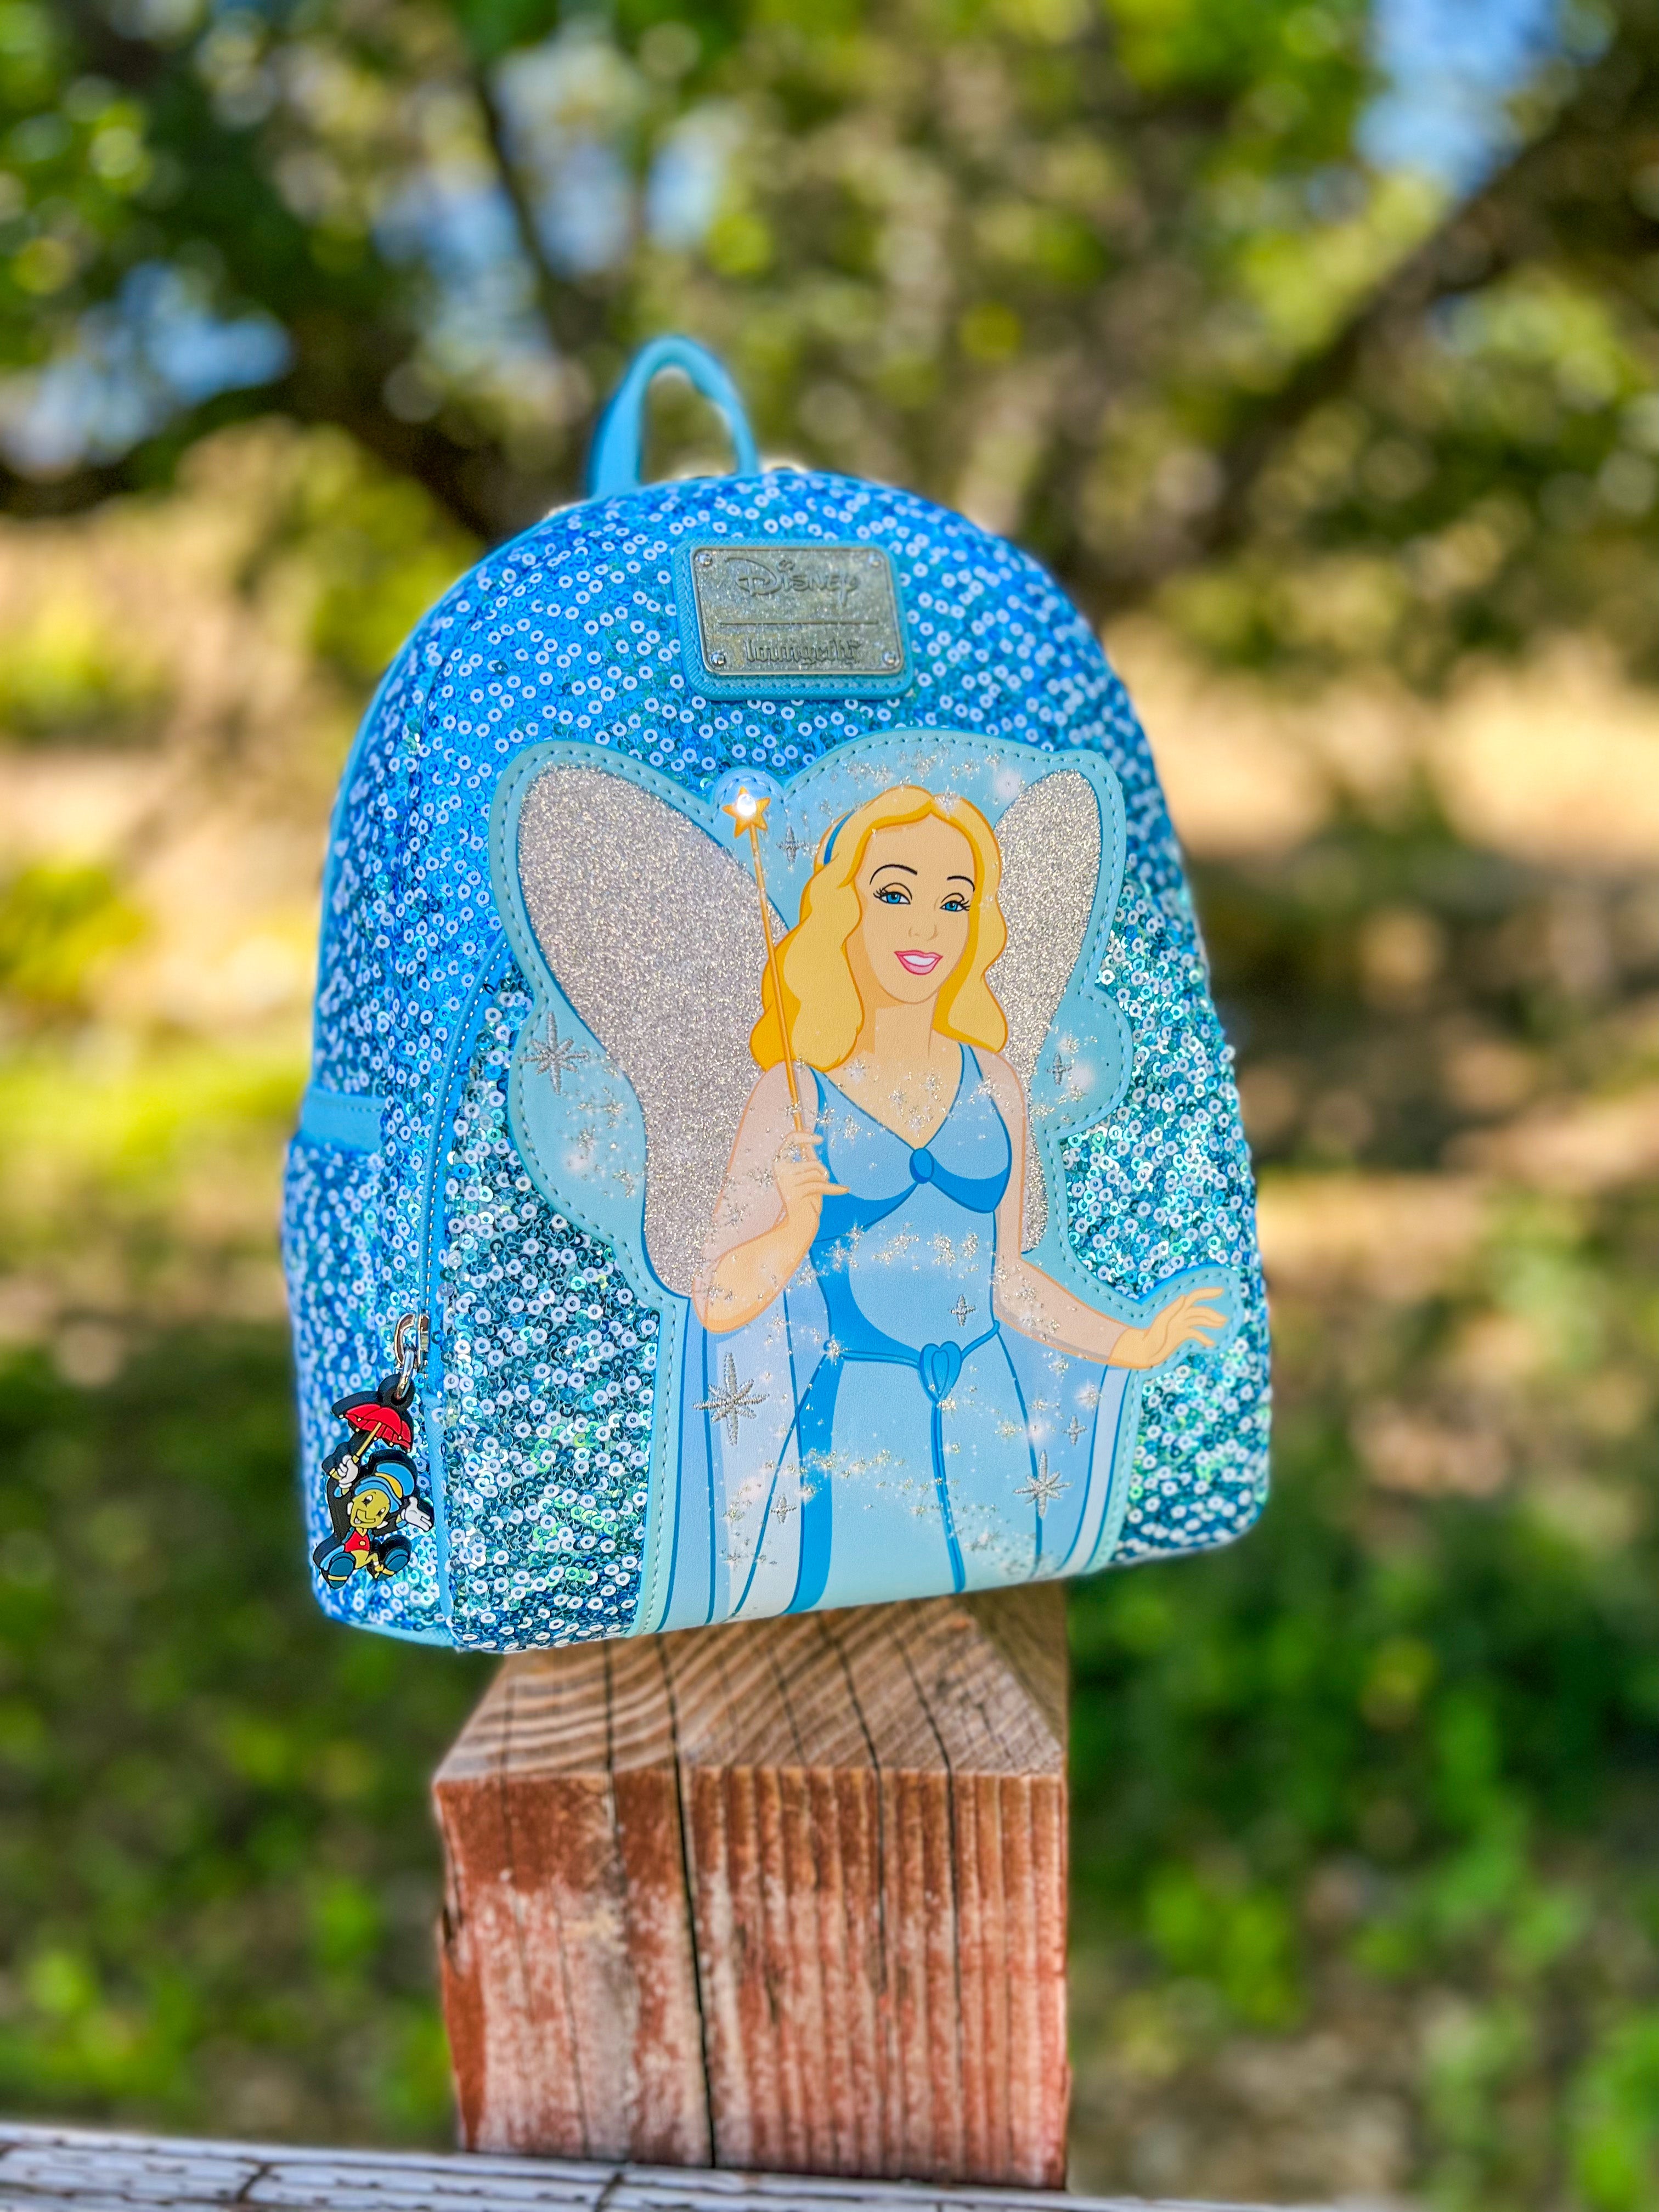 Loungefly Disney Sleeping Beauty Stained Glass Castle Mini Backpack